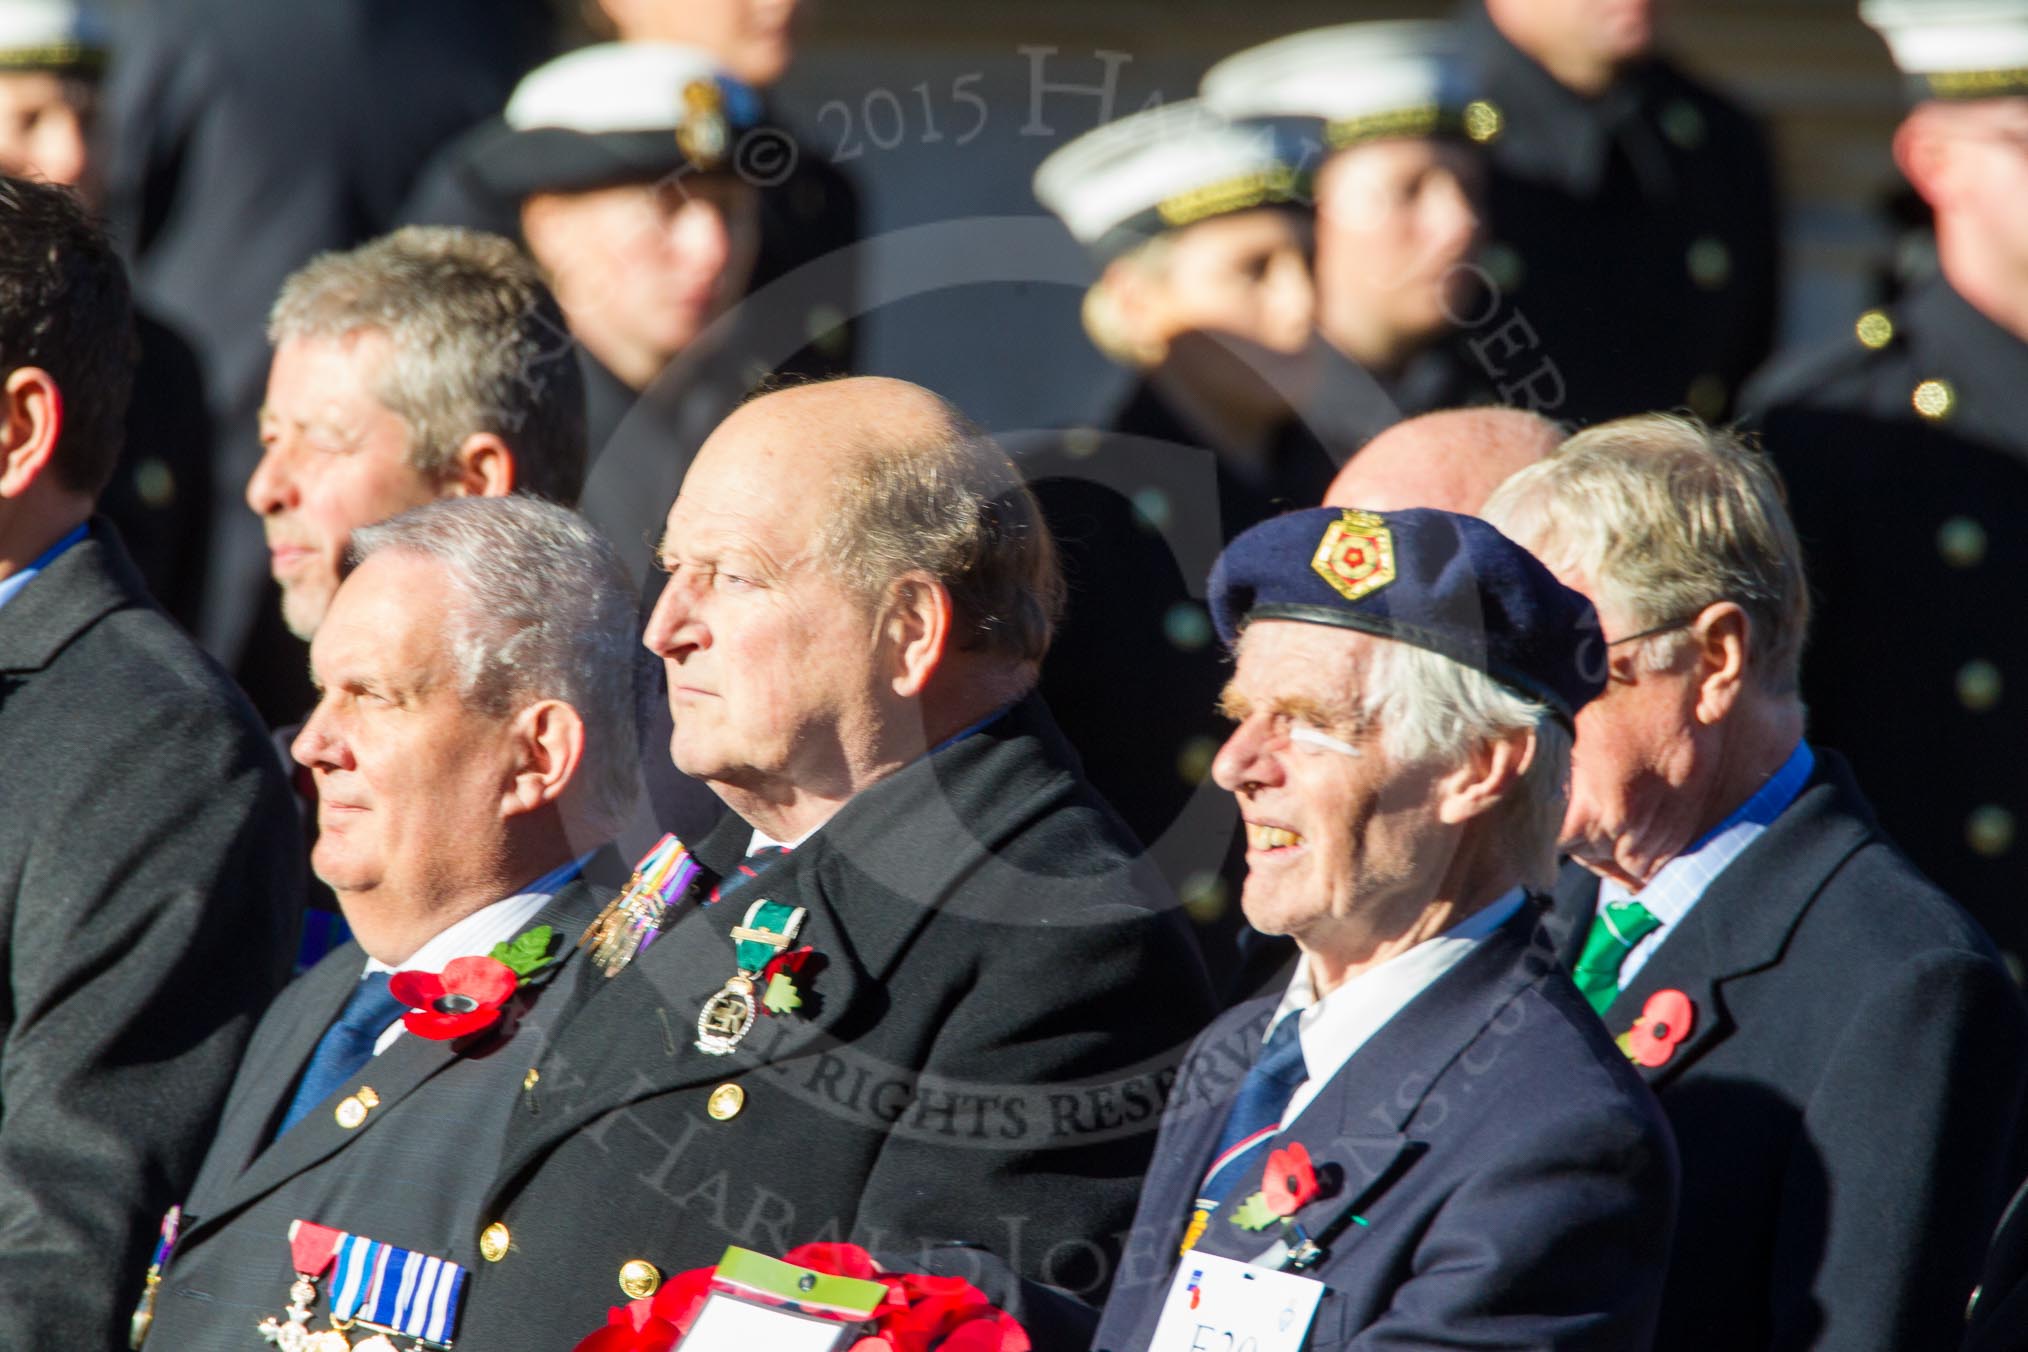 Remembrance Sunday Cenotaph March Past 2013: E20 - HMS Cumberland Association..
Press stand opposite the Foreign Office building, Whitehall, London SW1,
London,
Greater London,
United Kingdom,
on 10 November 2013 at 11:46, image #495